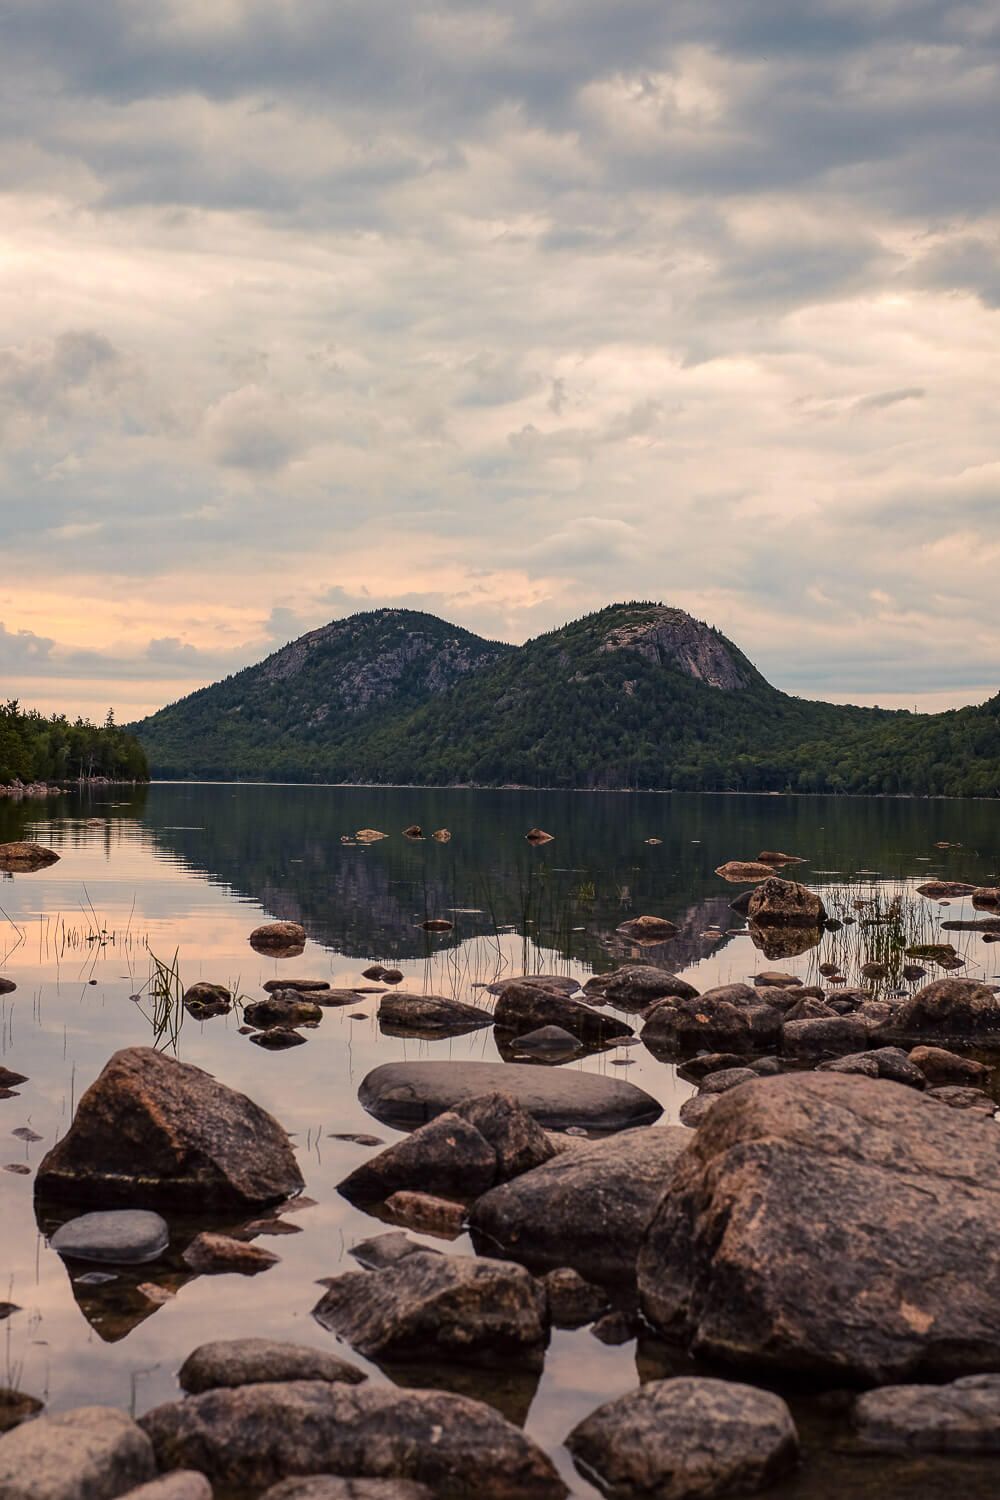 The best hikes in Acadia National Park